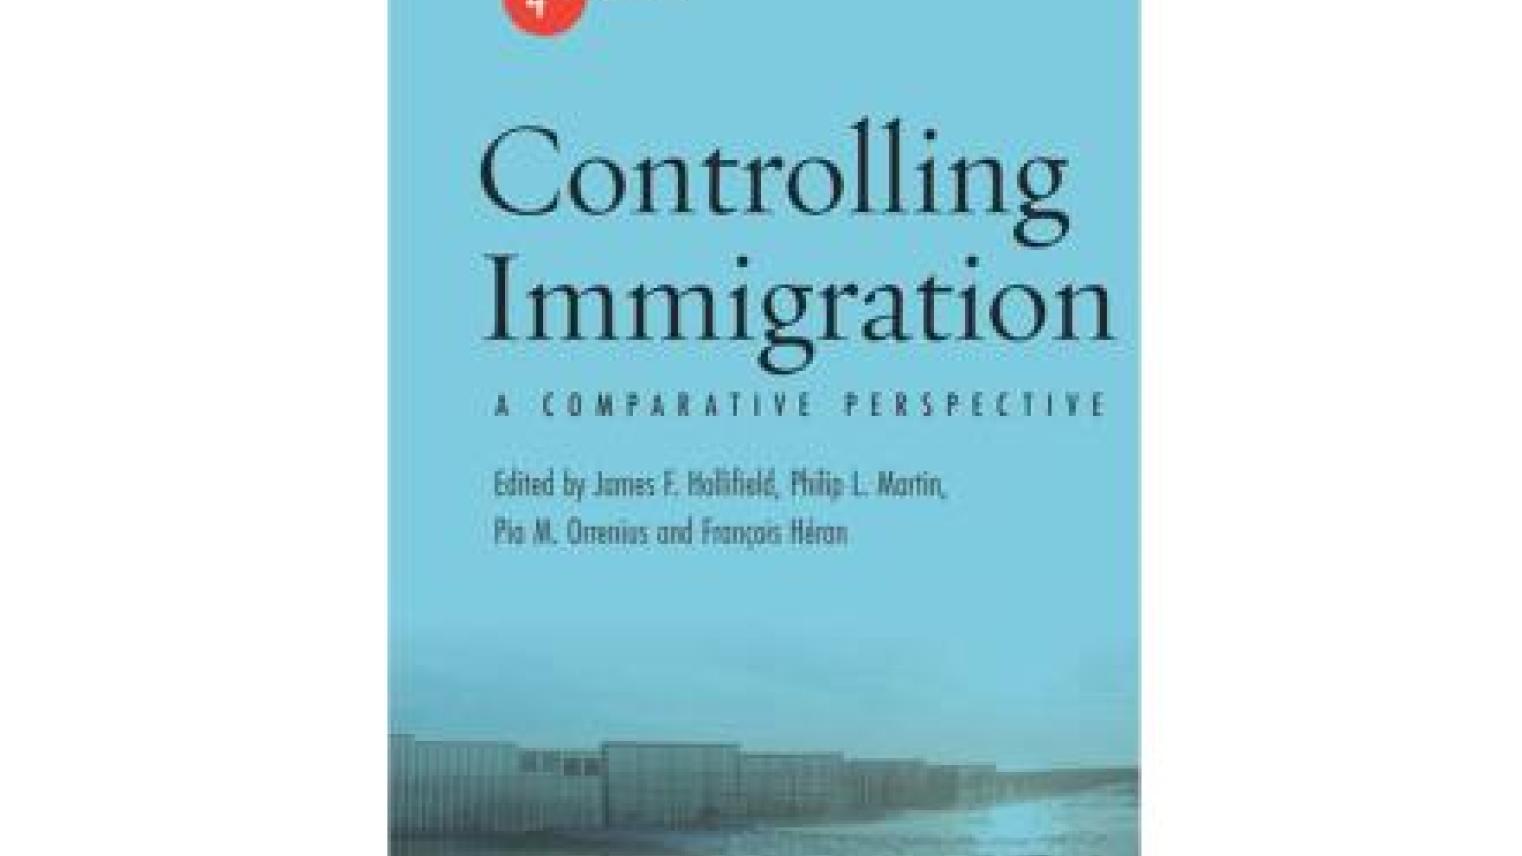 Image: Book cover, Controlling Immigration (Provided)